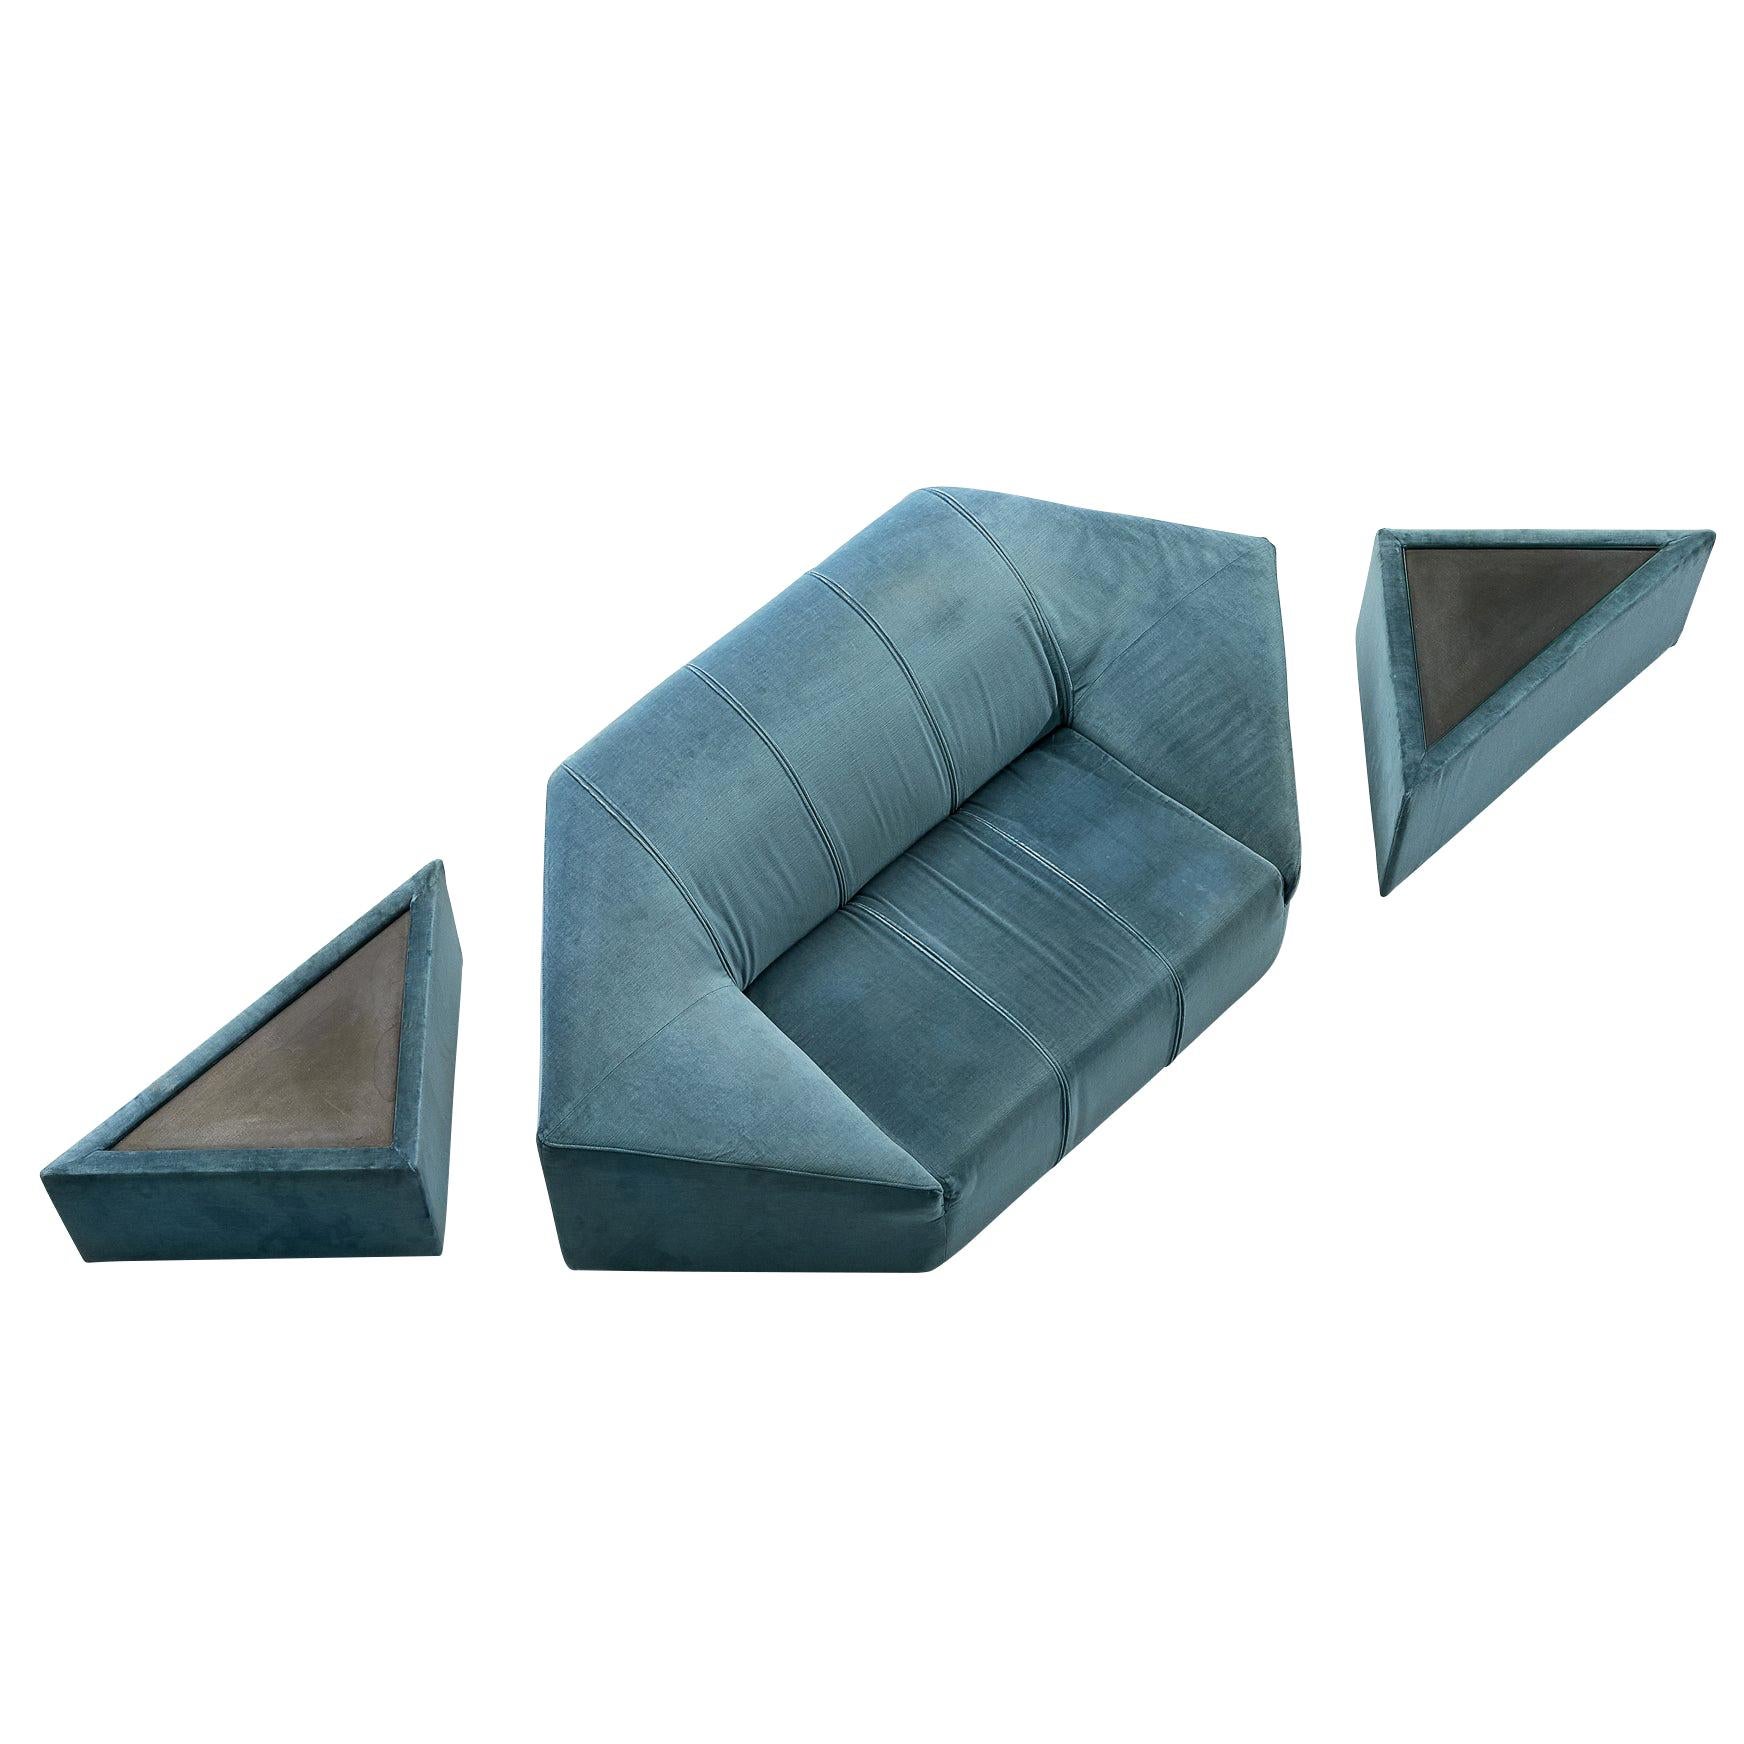 Hexagonal Sofa with Pair of Side Tables